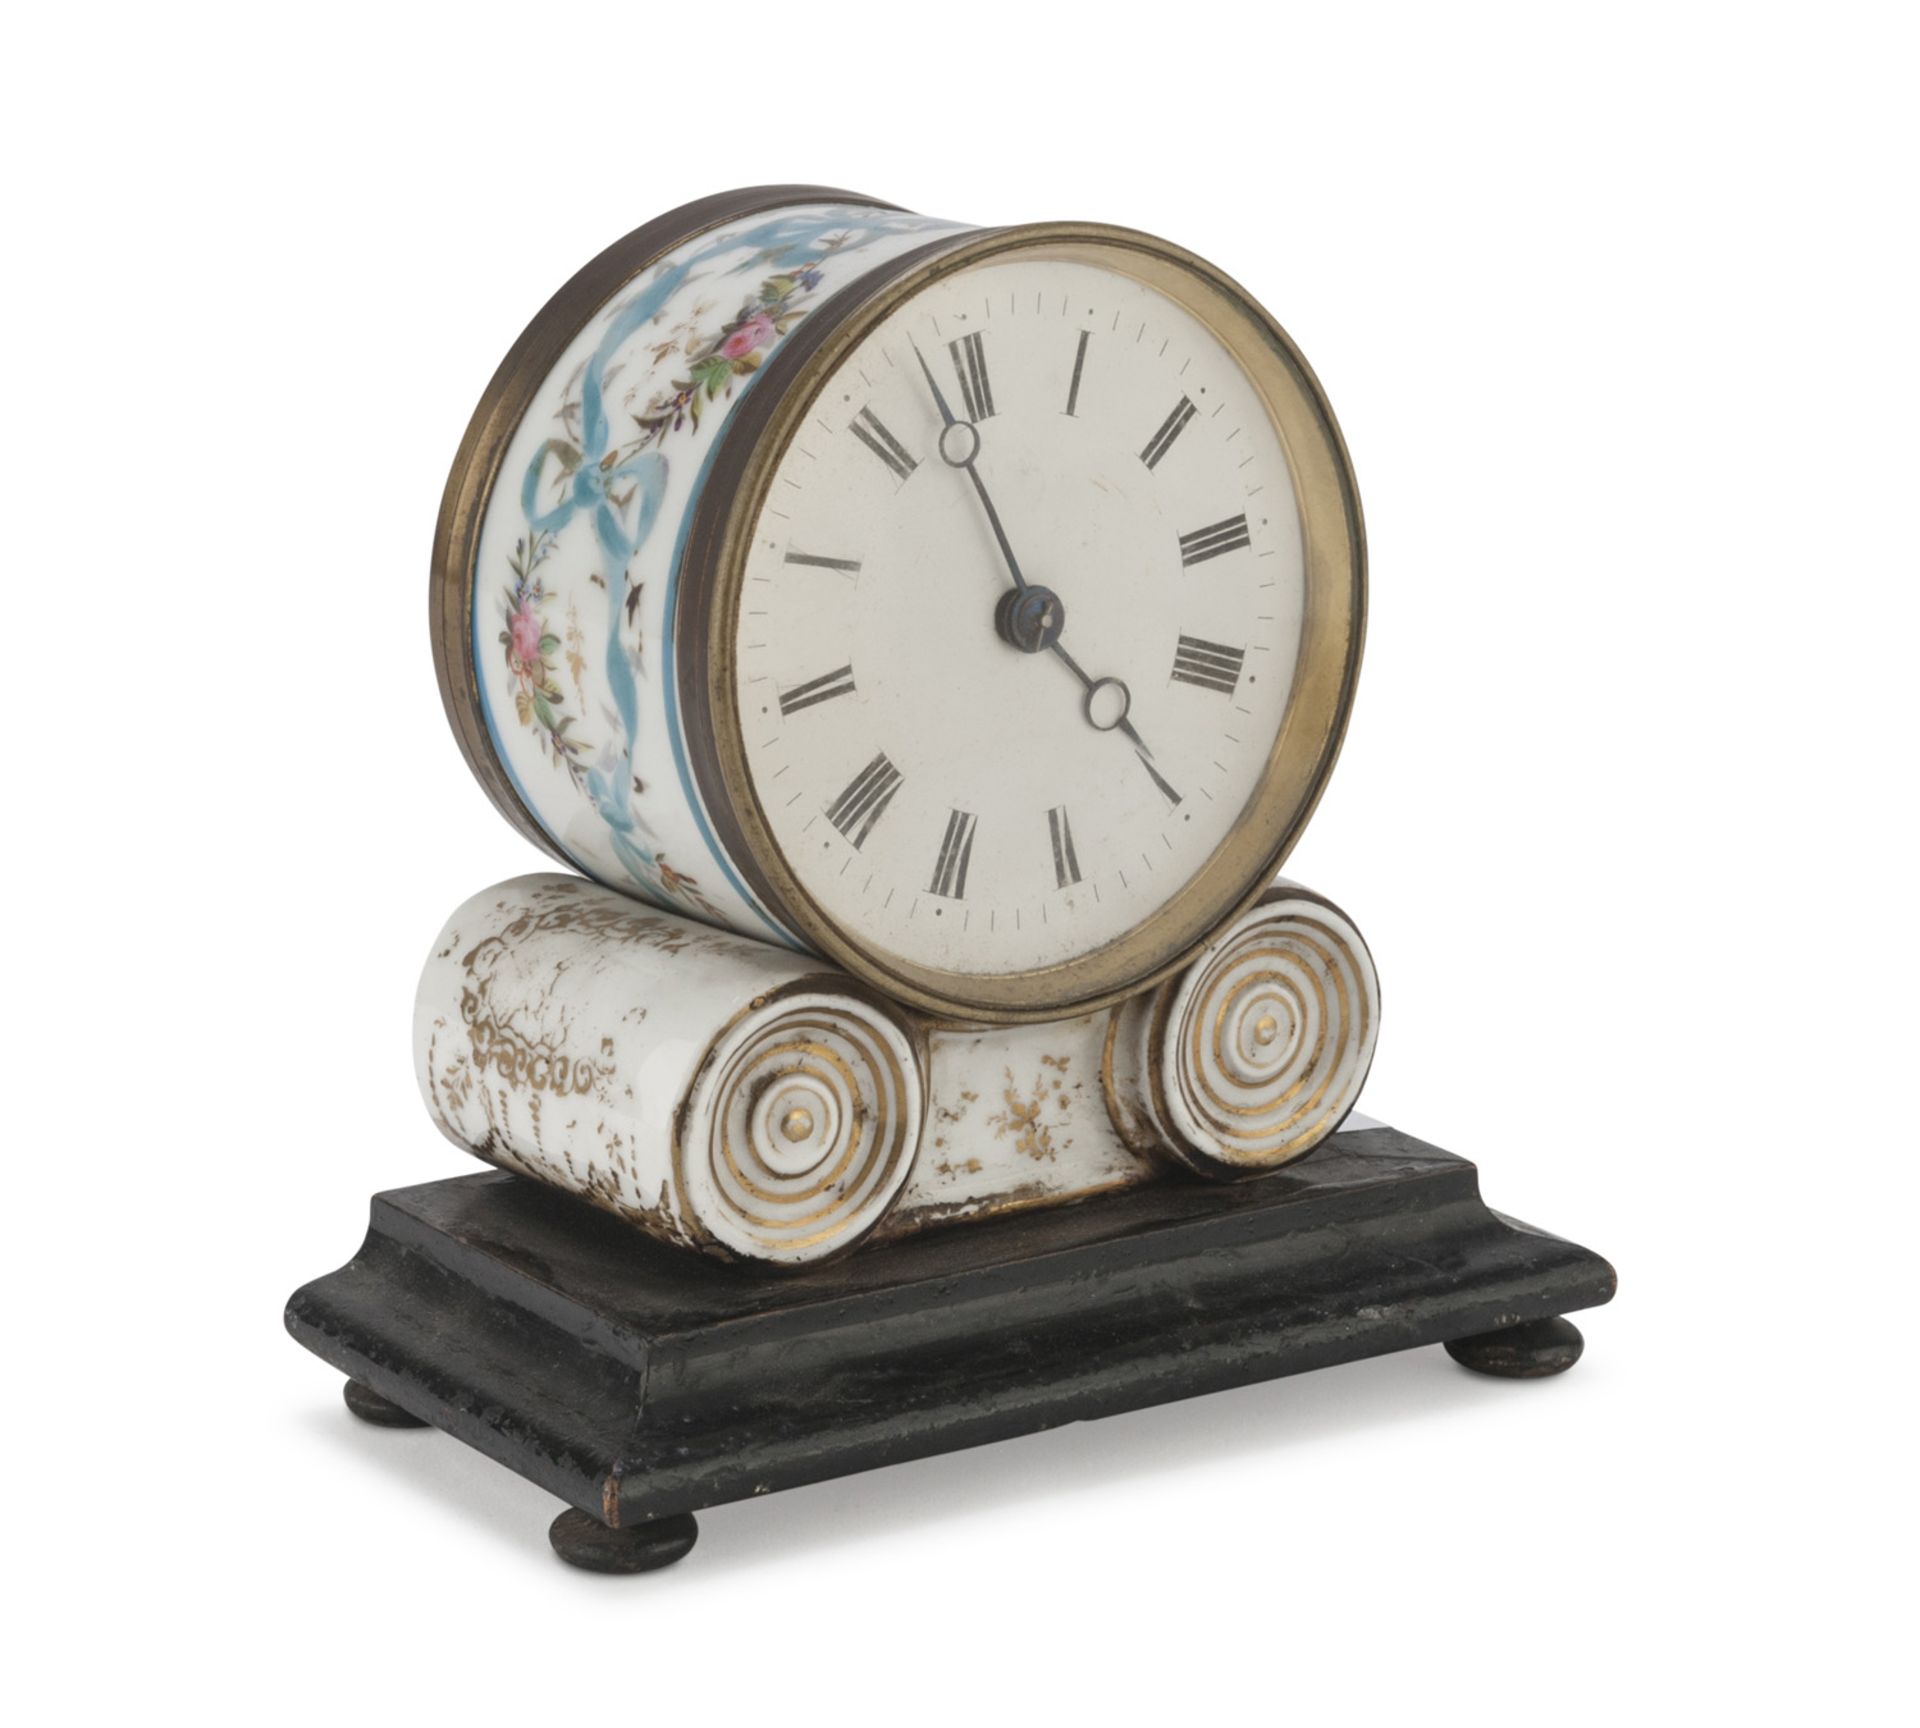 SMALL CLOCK IN PORCELAIN, 19TH CENTURY decorated with ribbons, flowers and gold. Round dial. Base in